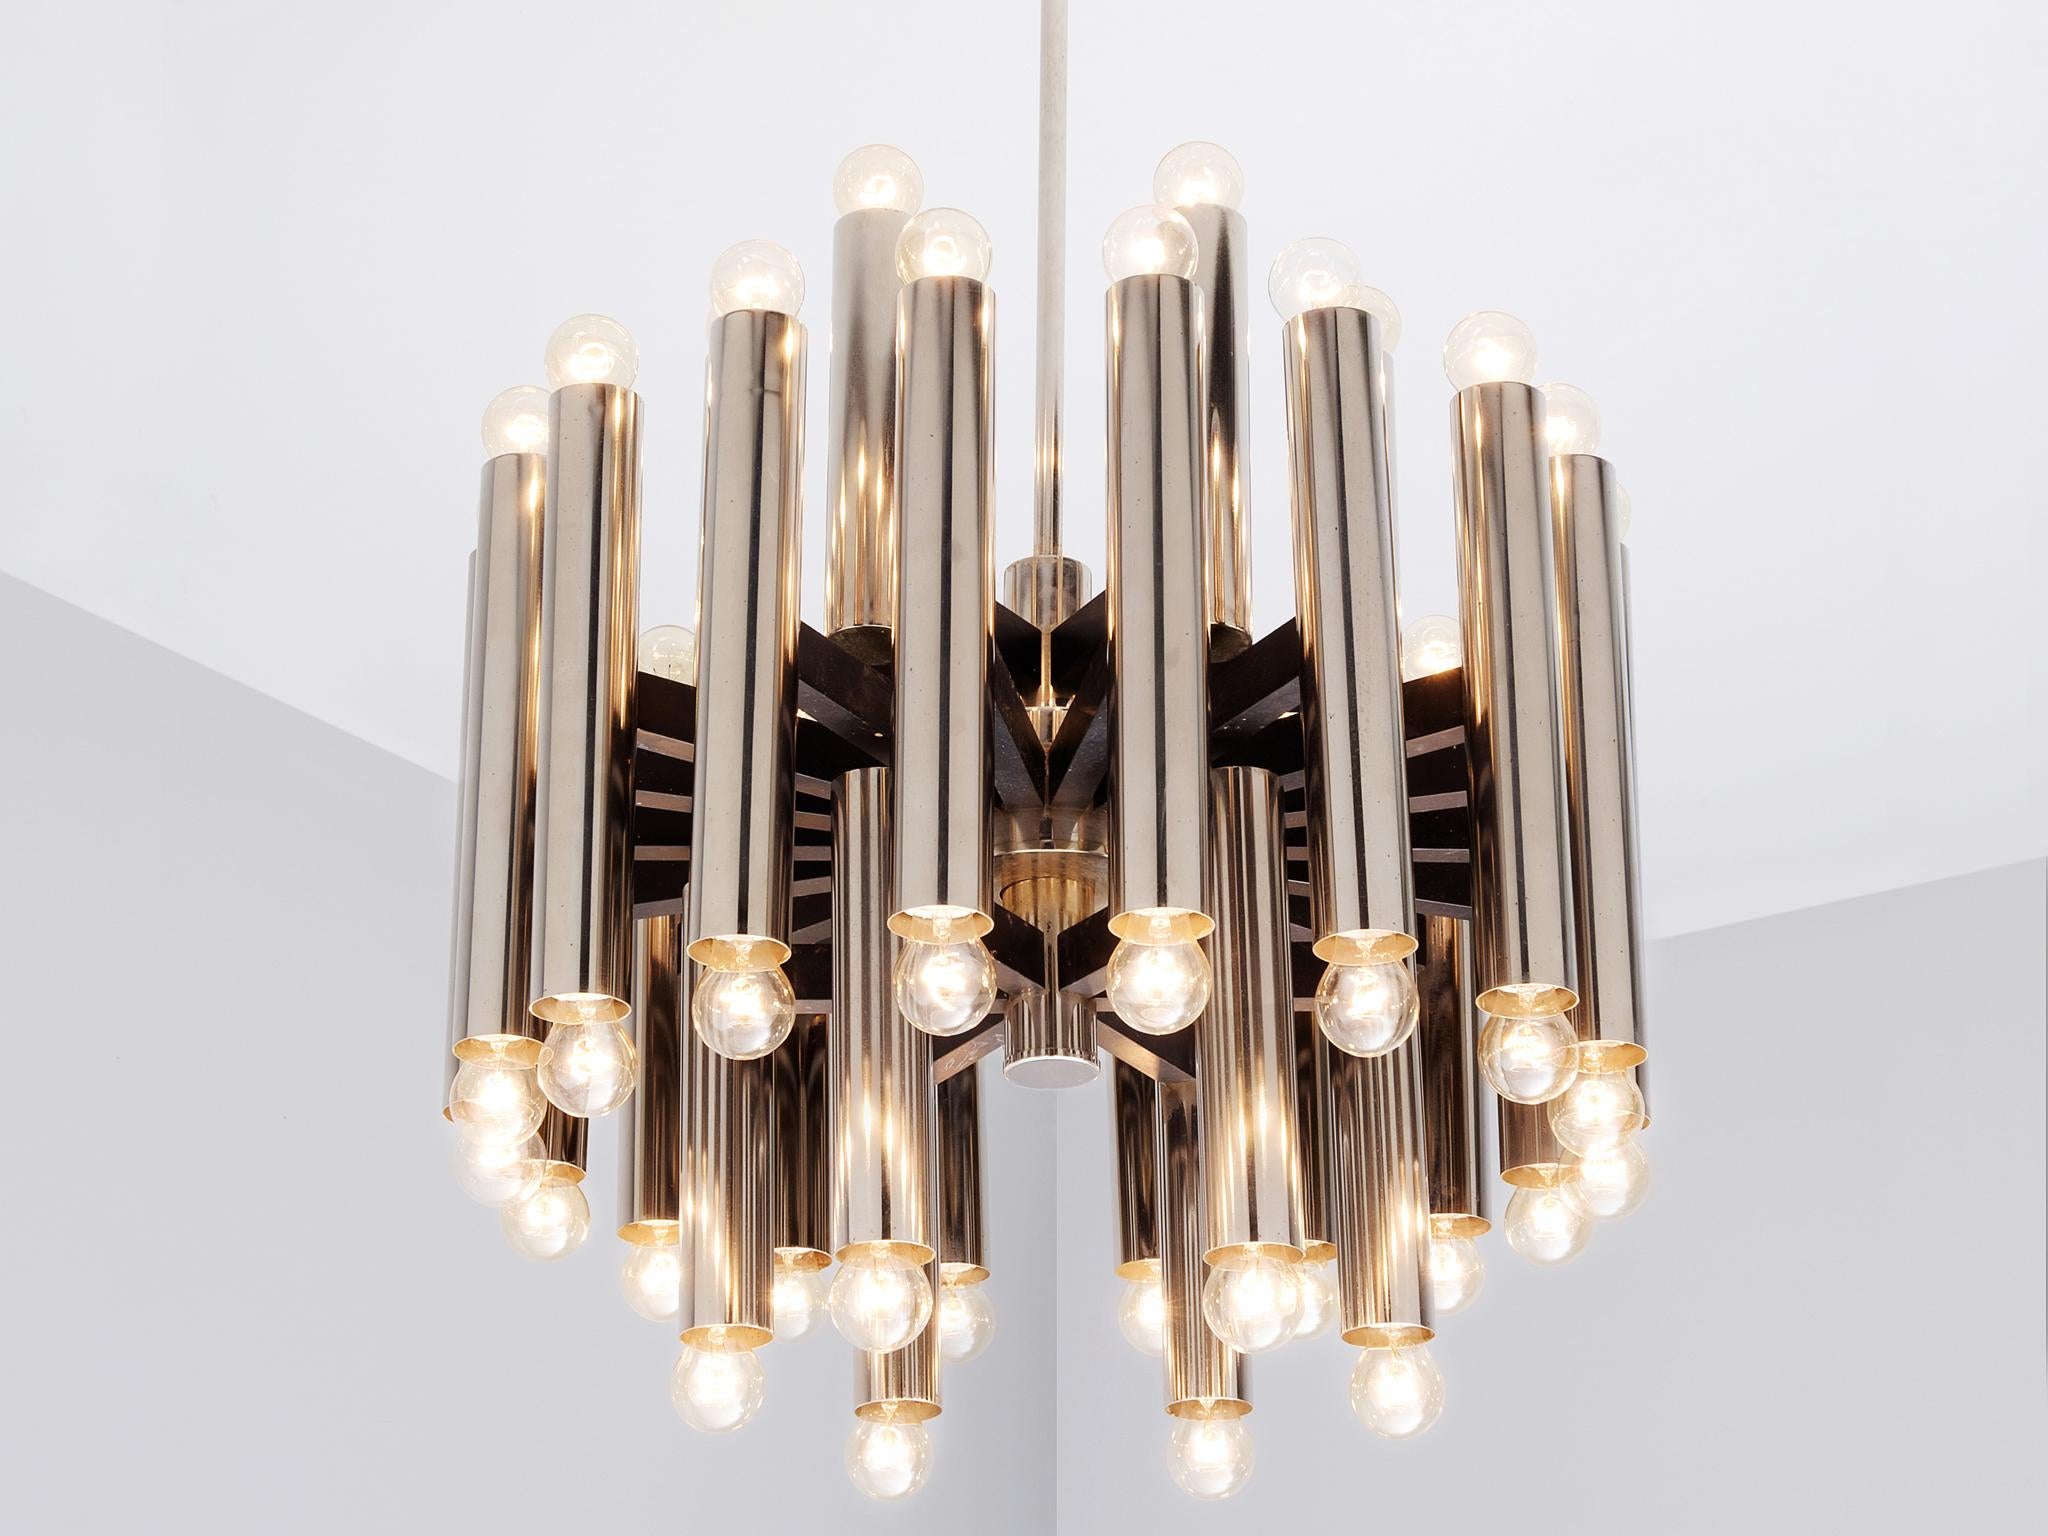 Large German Chandelier in Chrome-Plated Steel